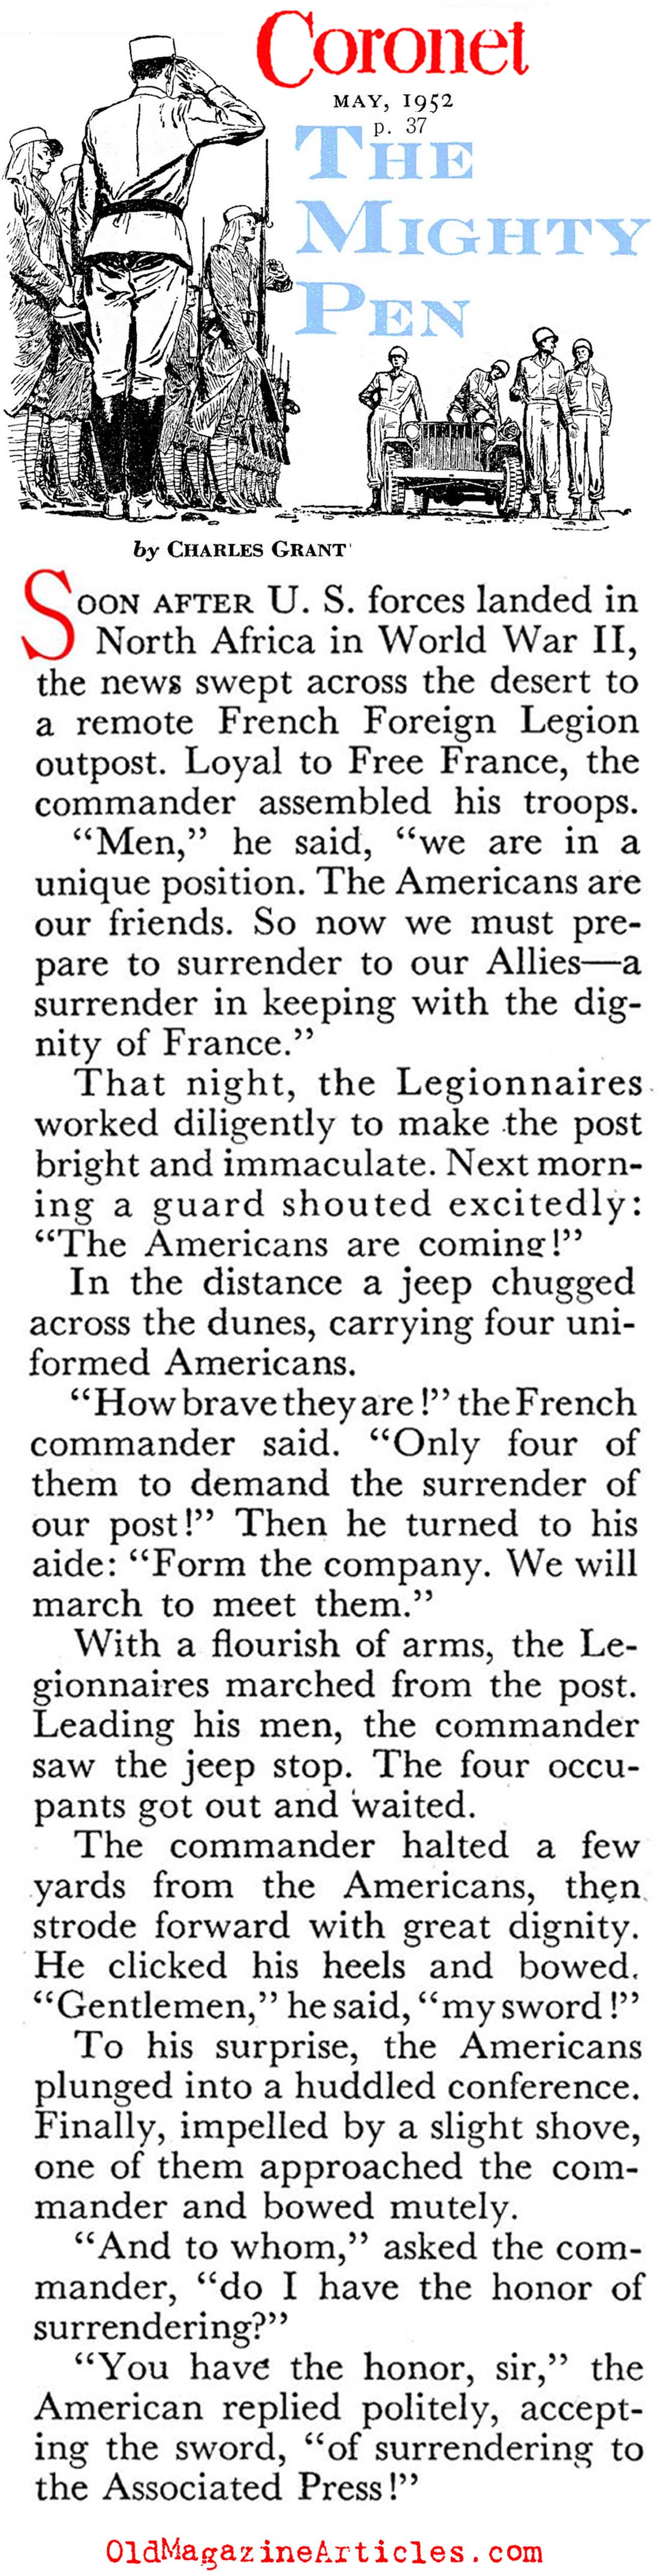 A Victory for the Associated Press (Coronet Magazine, 1952)